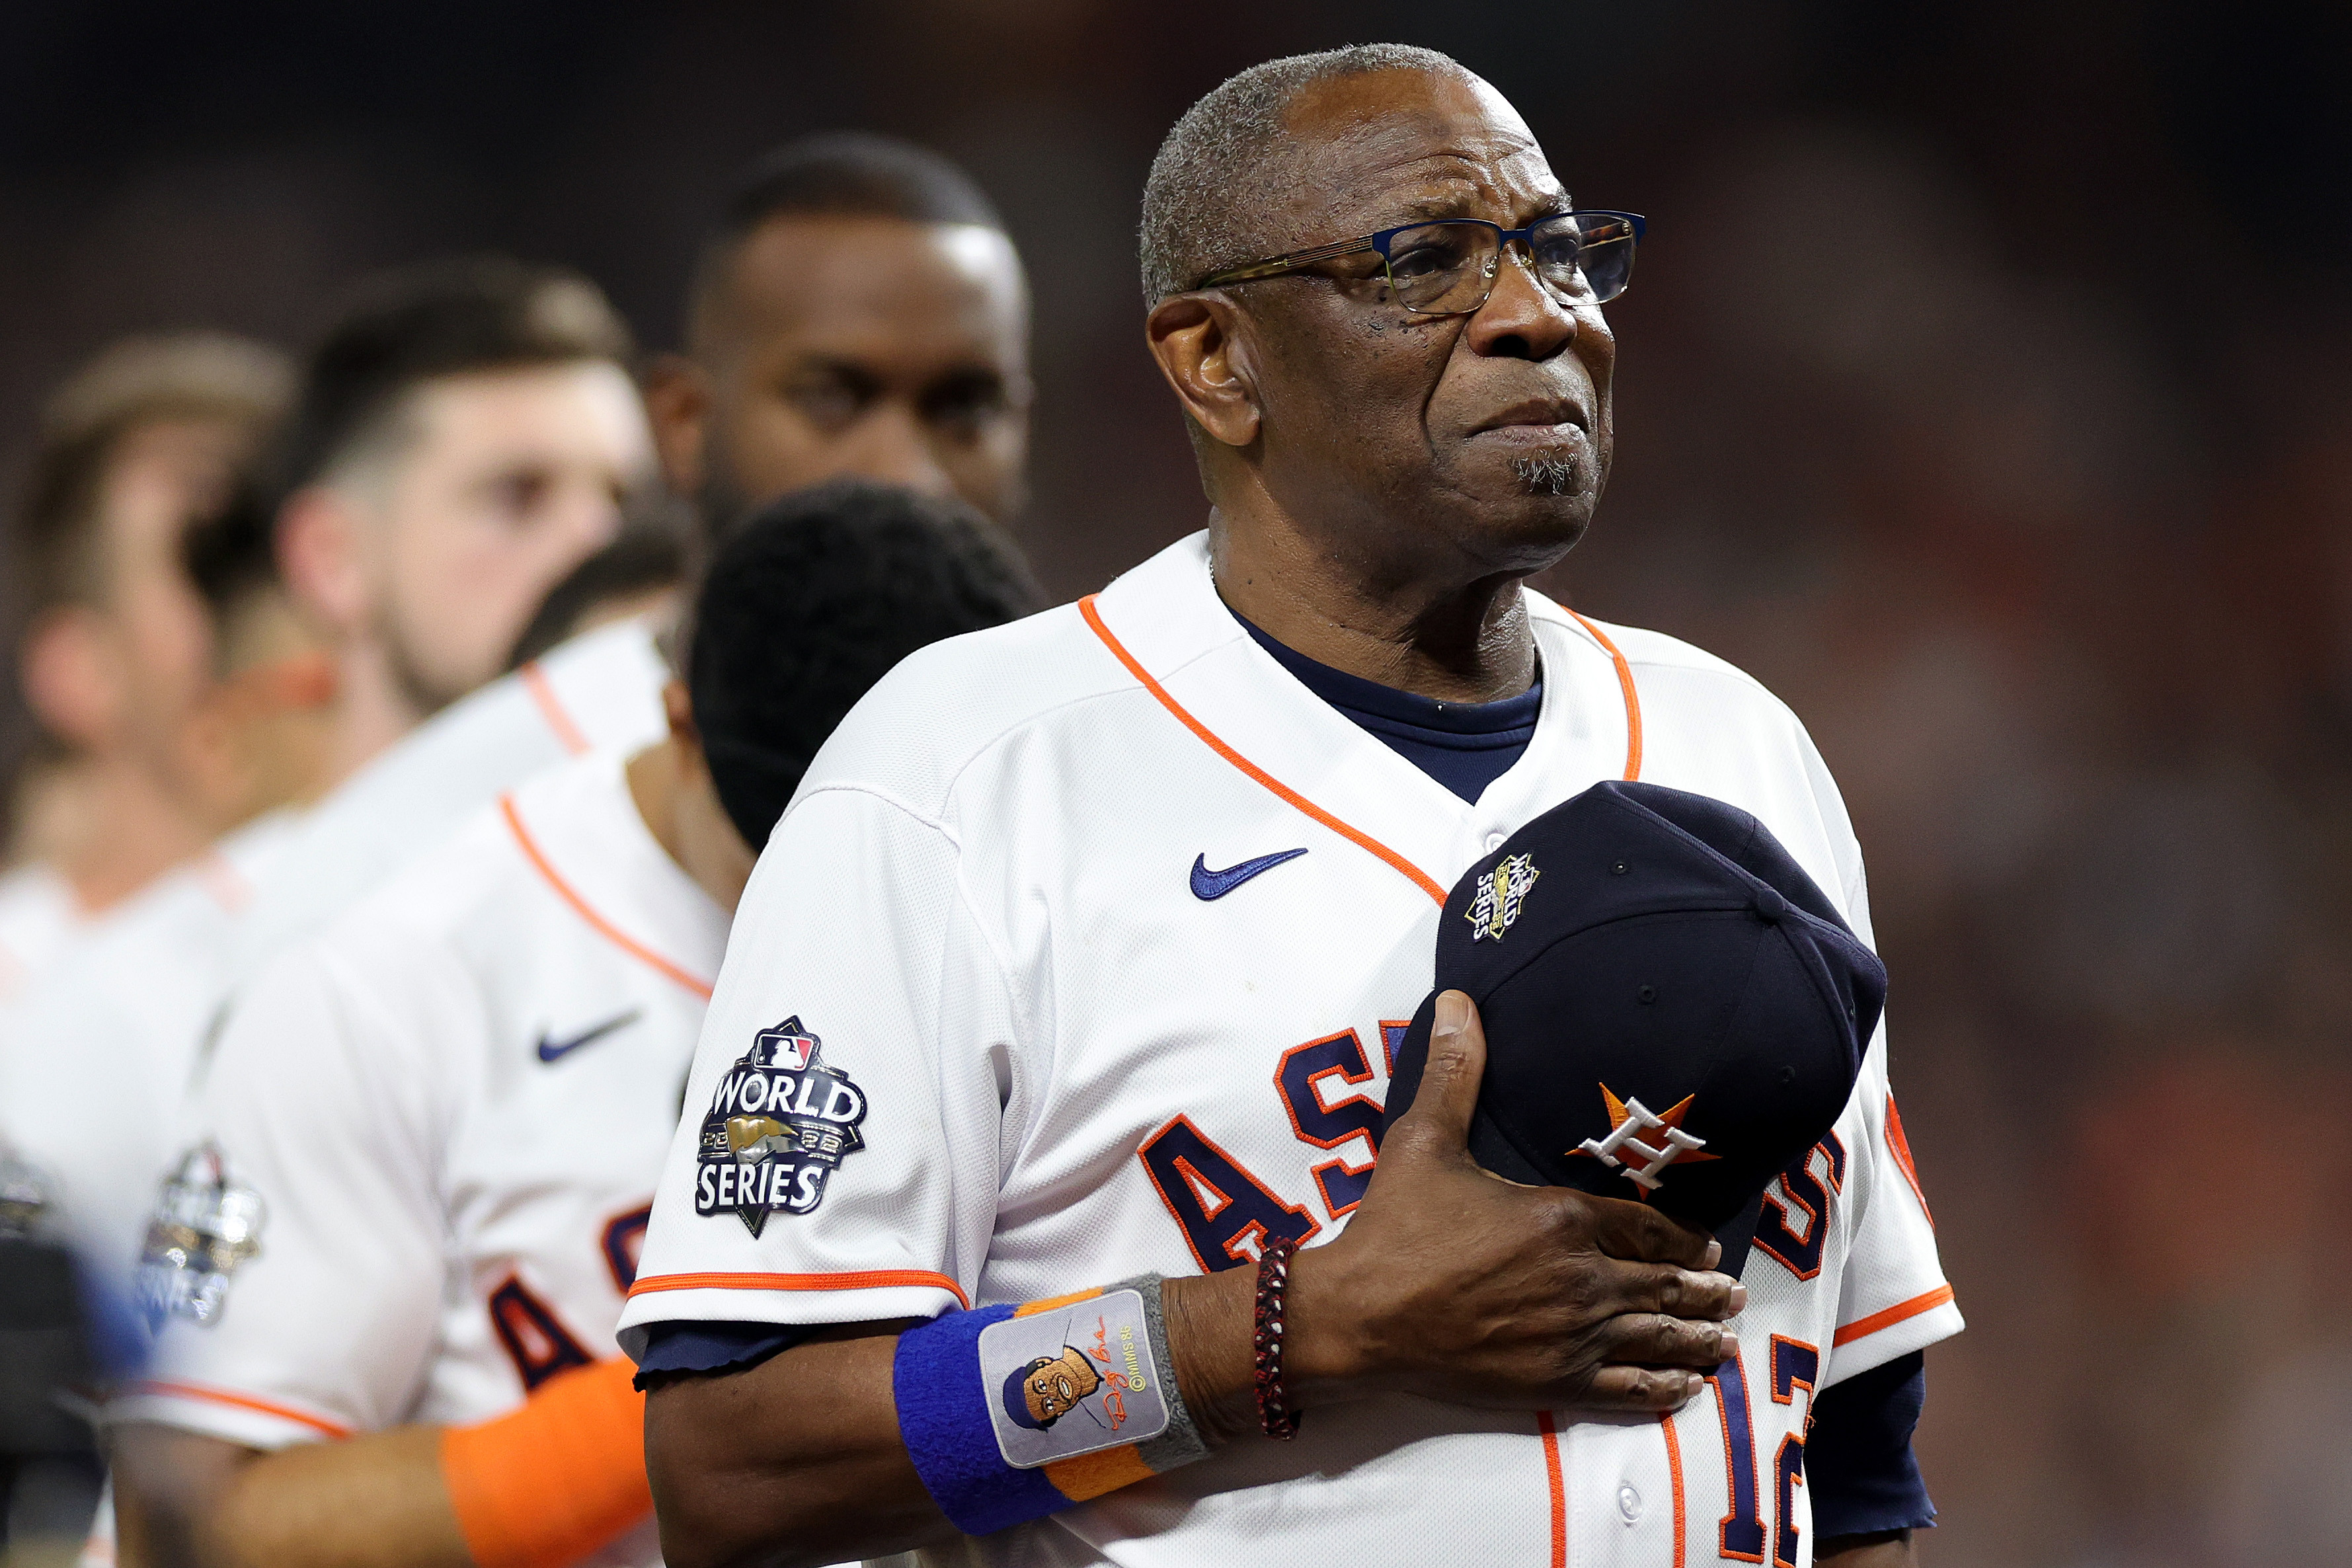 Baker laments lack of U.S.-born Black players in World Series